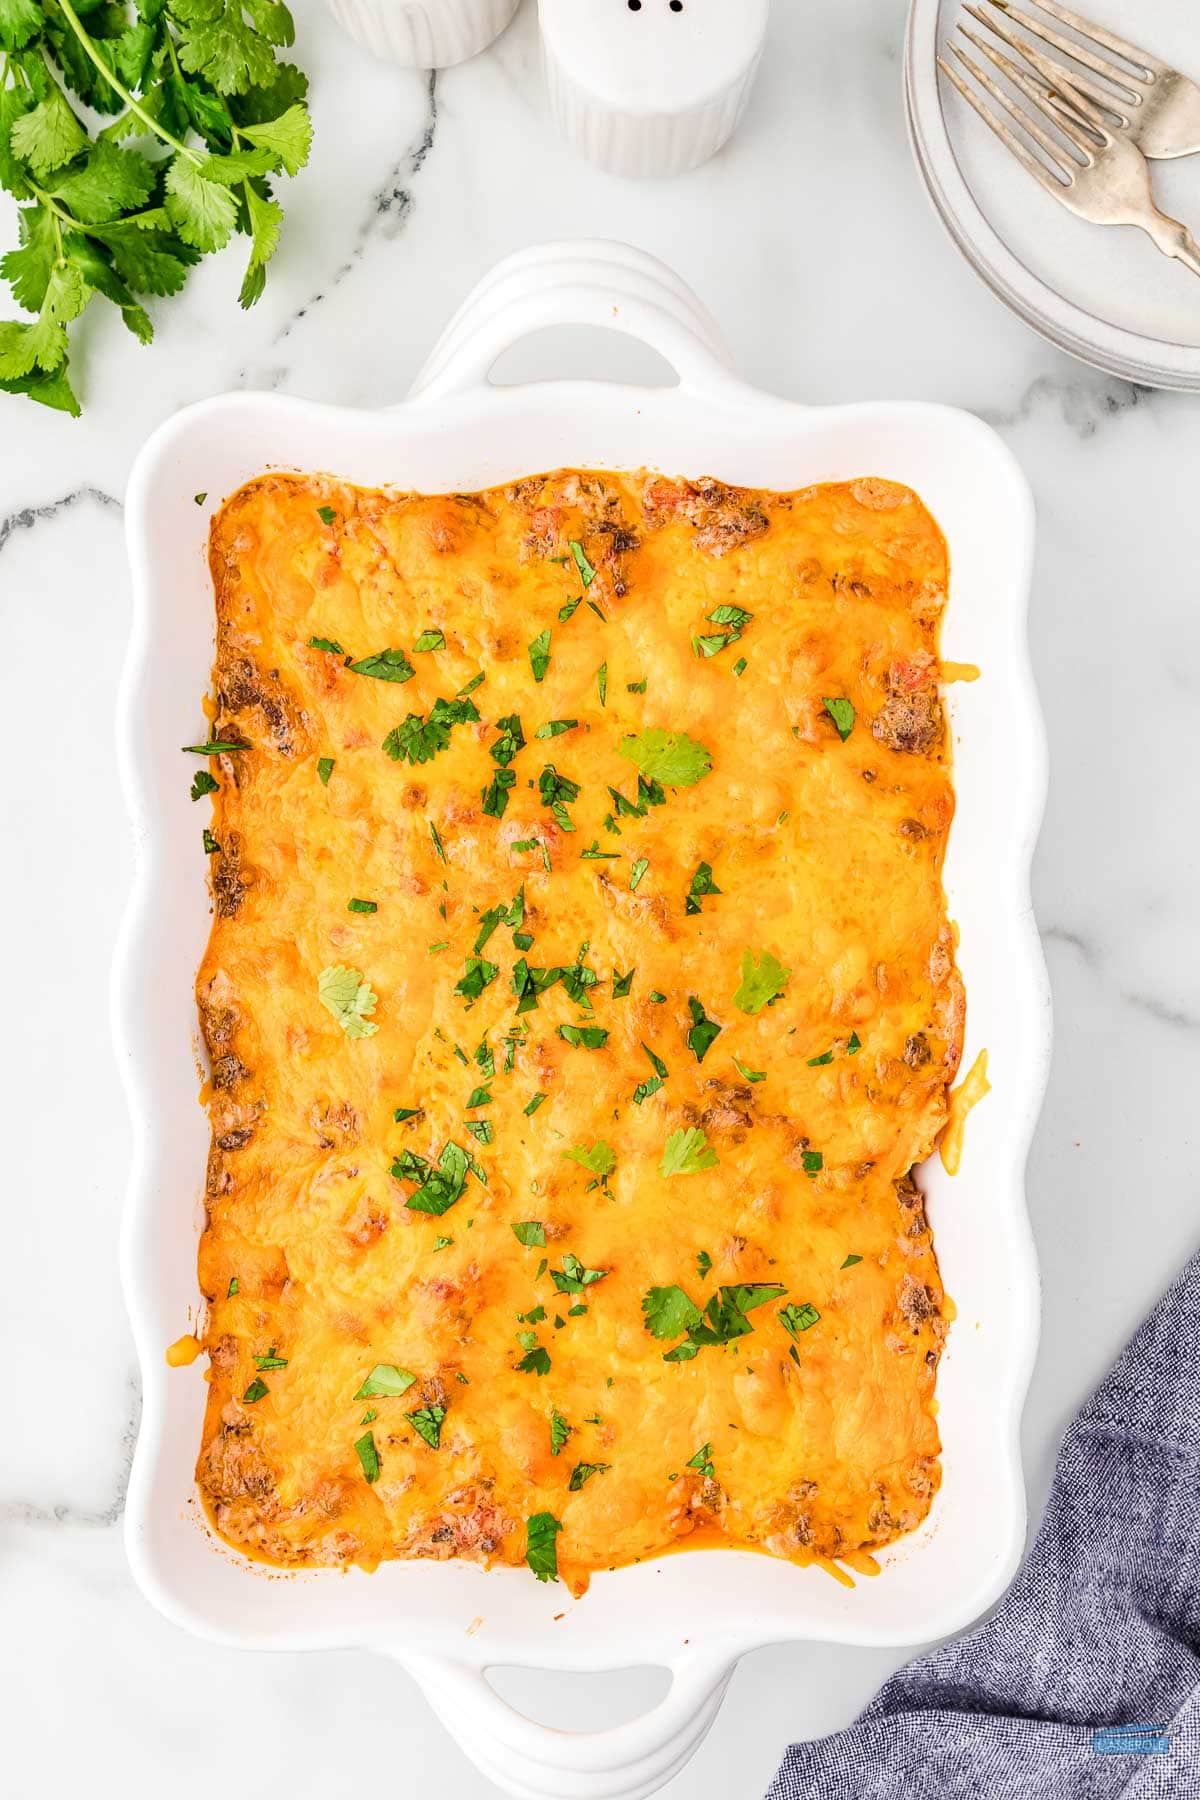 baked mexican trash casserole topped with melted cheese